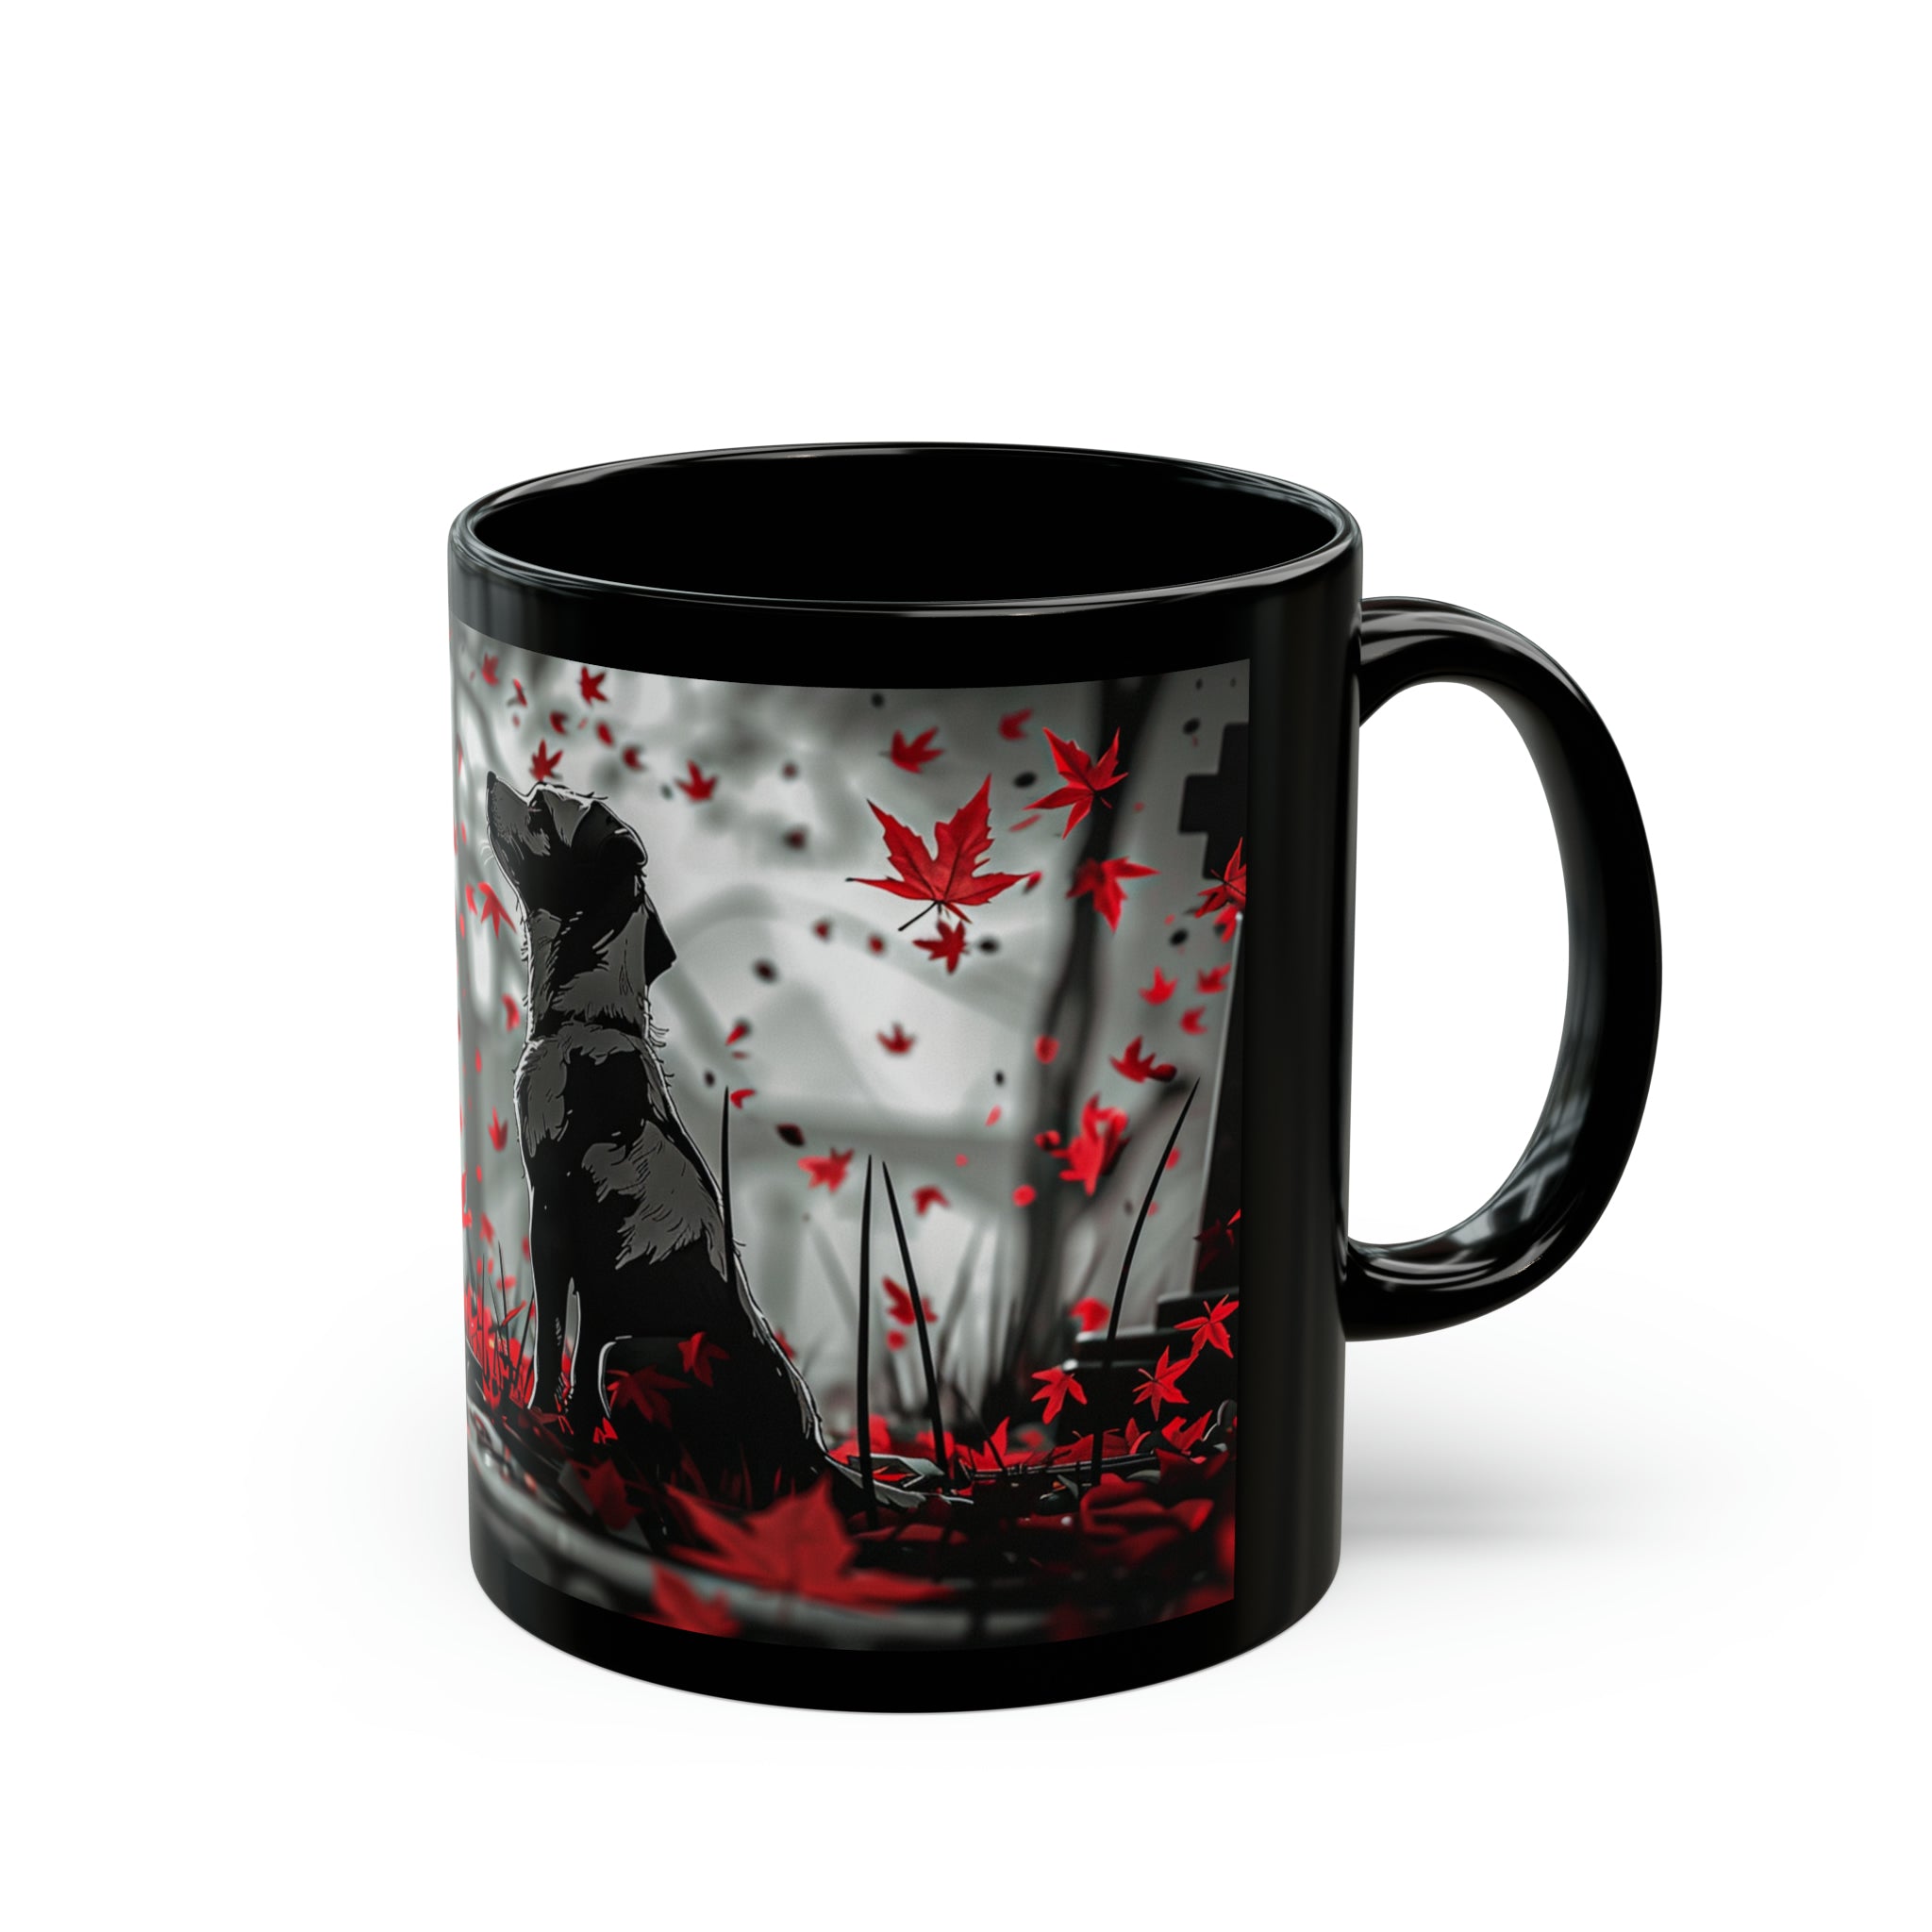 "Eternal Companion: Canine Guardian Angel Black Mug - Solemn Loyalty in Every Sip" (Available in 11oz & 15oz)